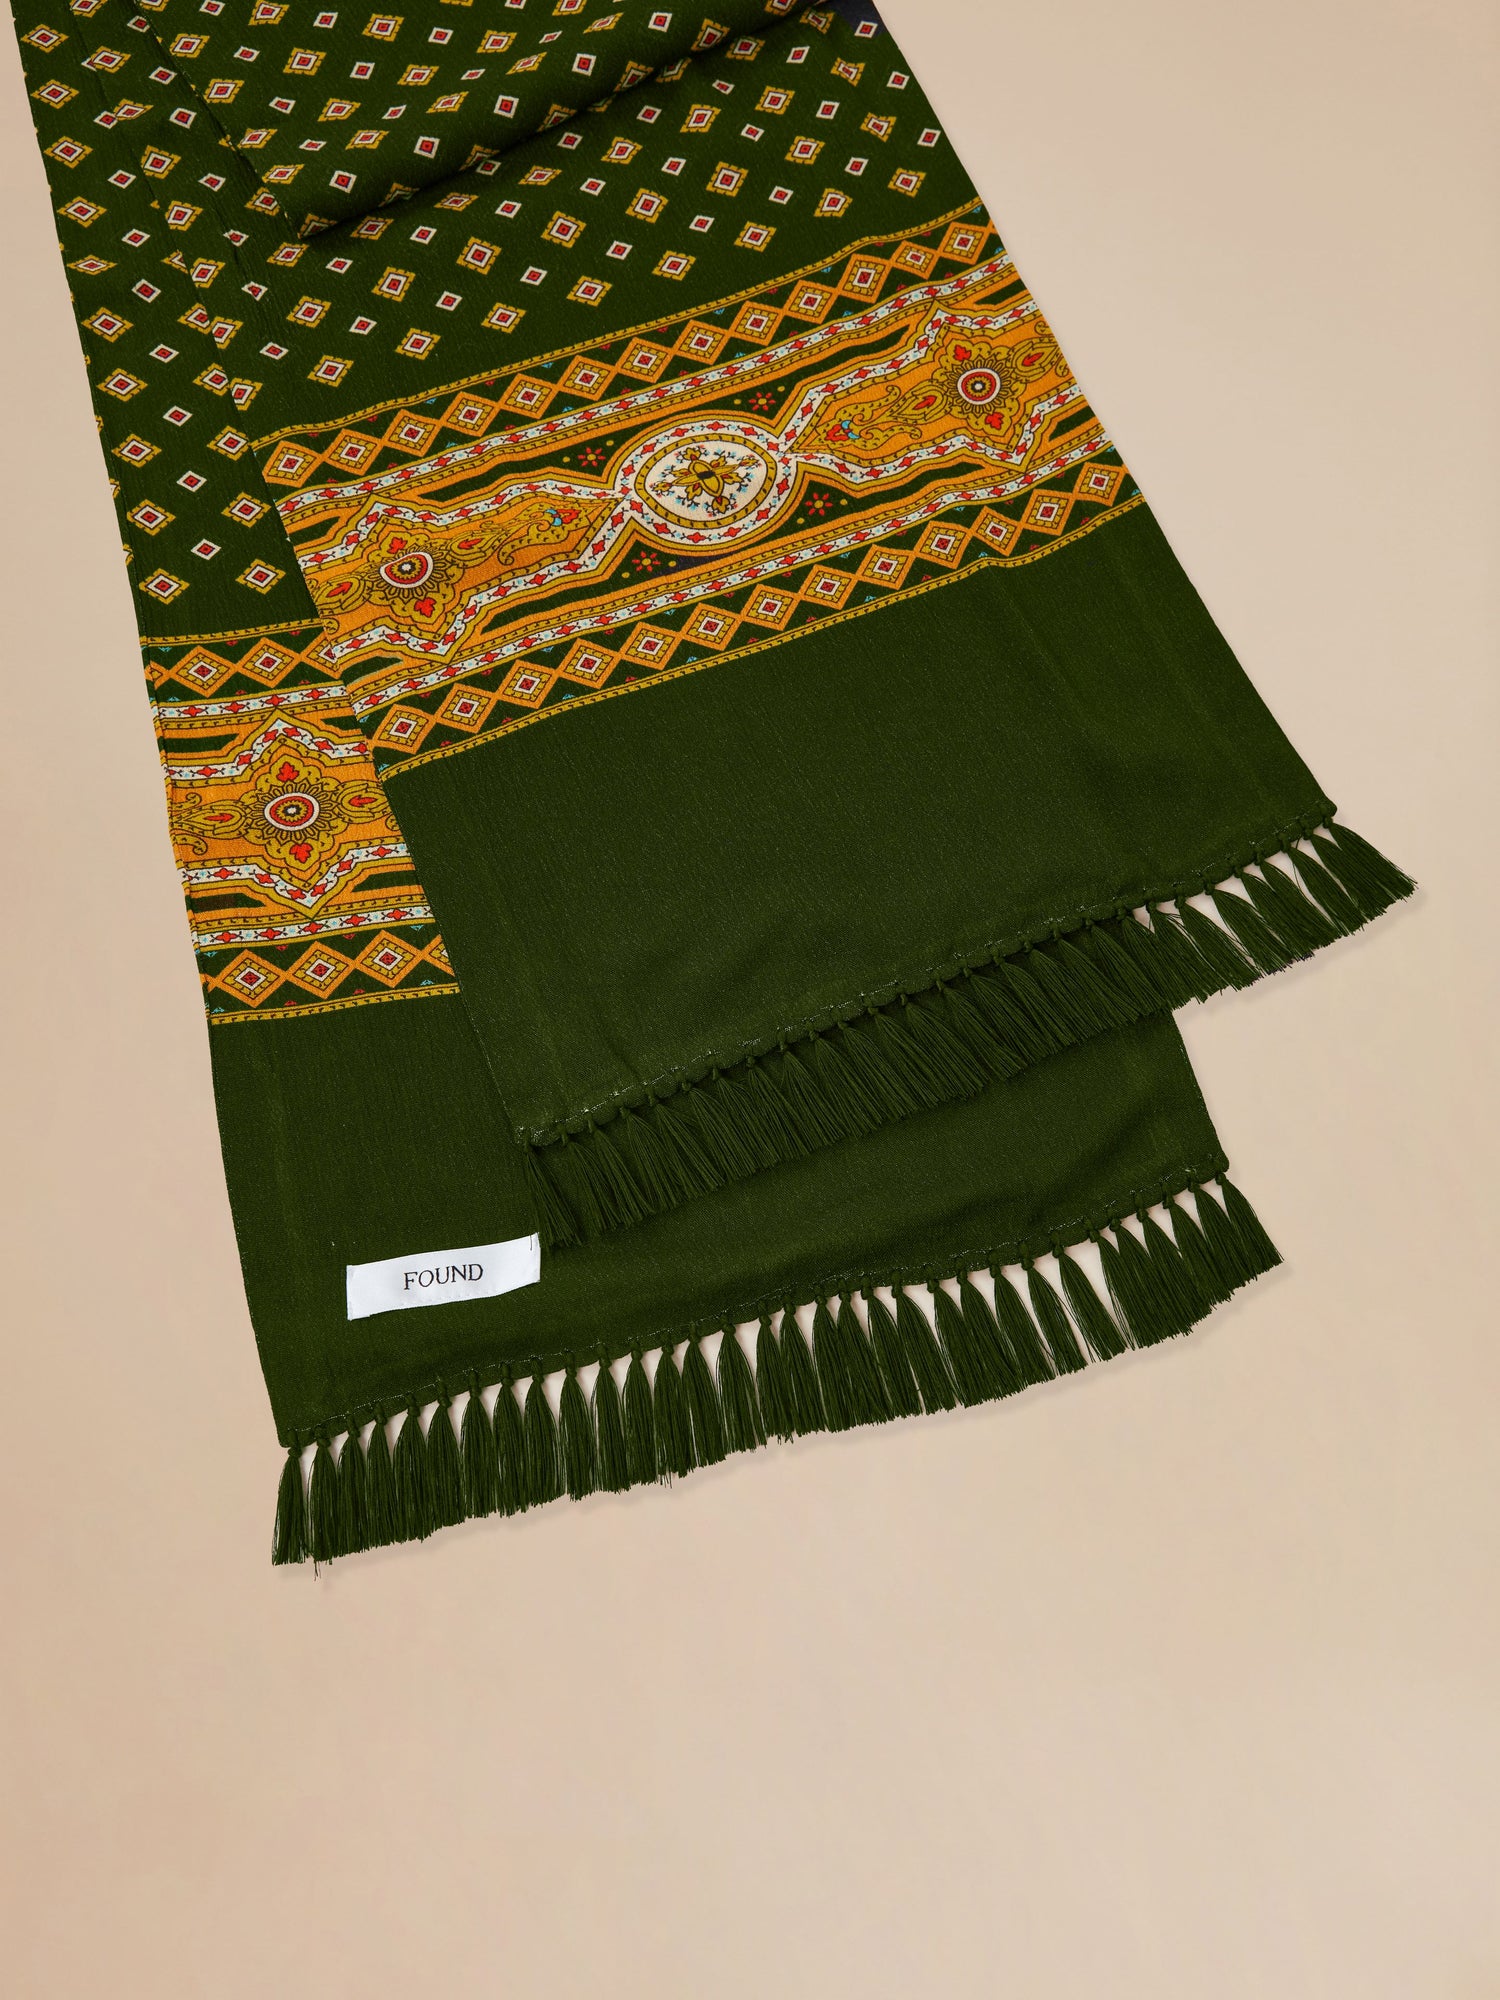 A Greener Pastures scarf with tassels made by Found.